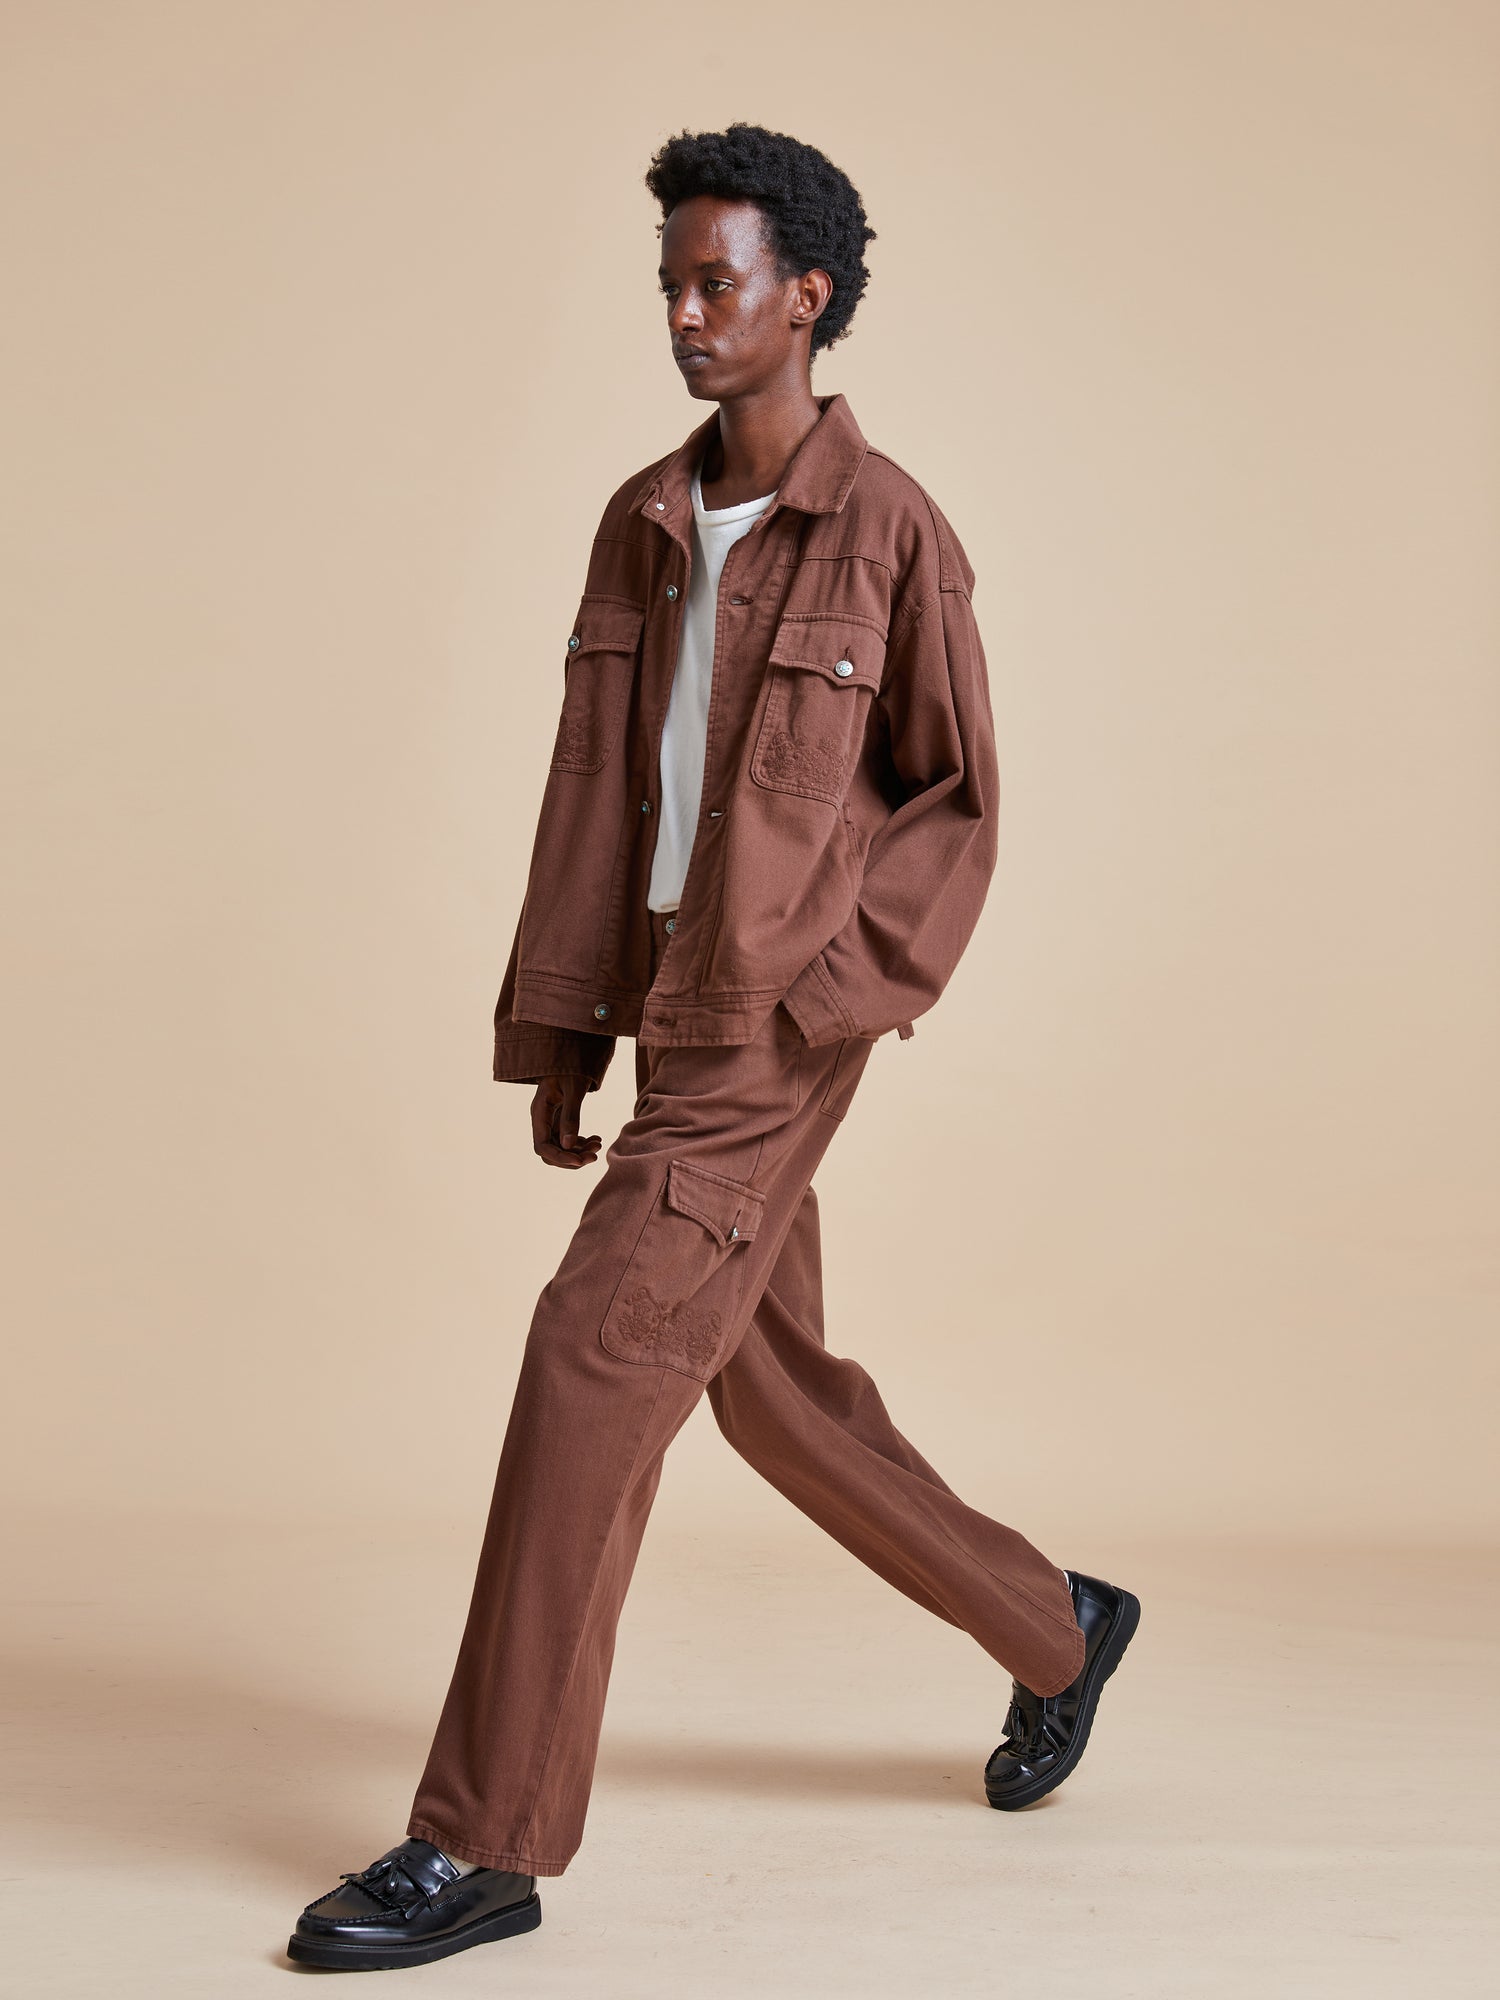 The model is wearing Dusky Western Cargo Jeans by Found and a white shirt.